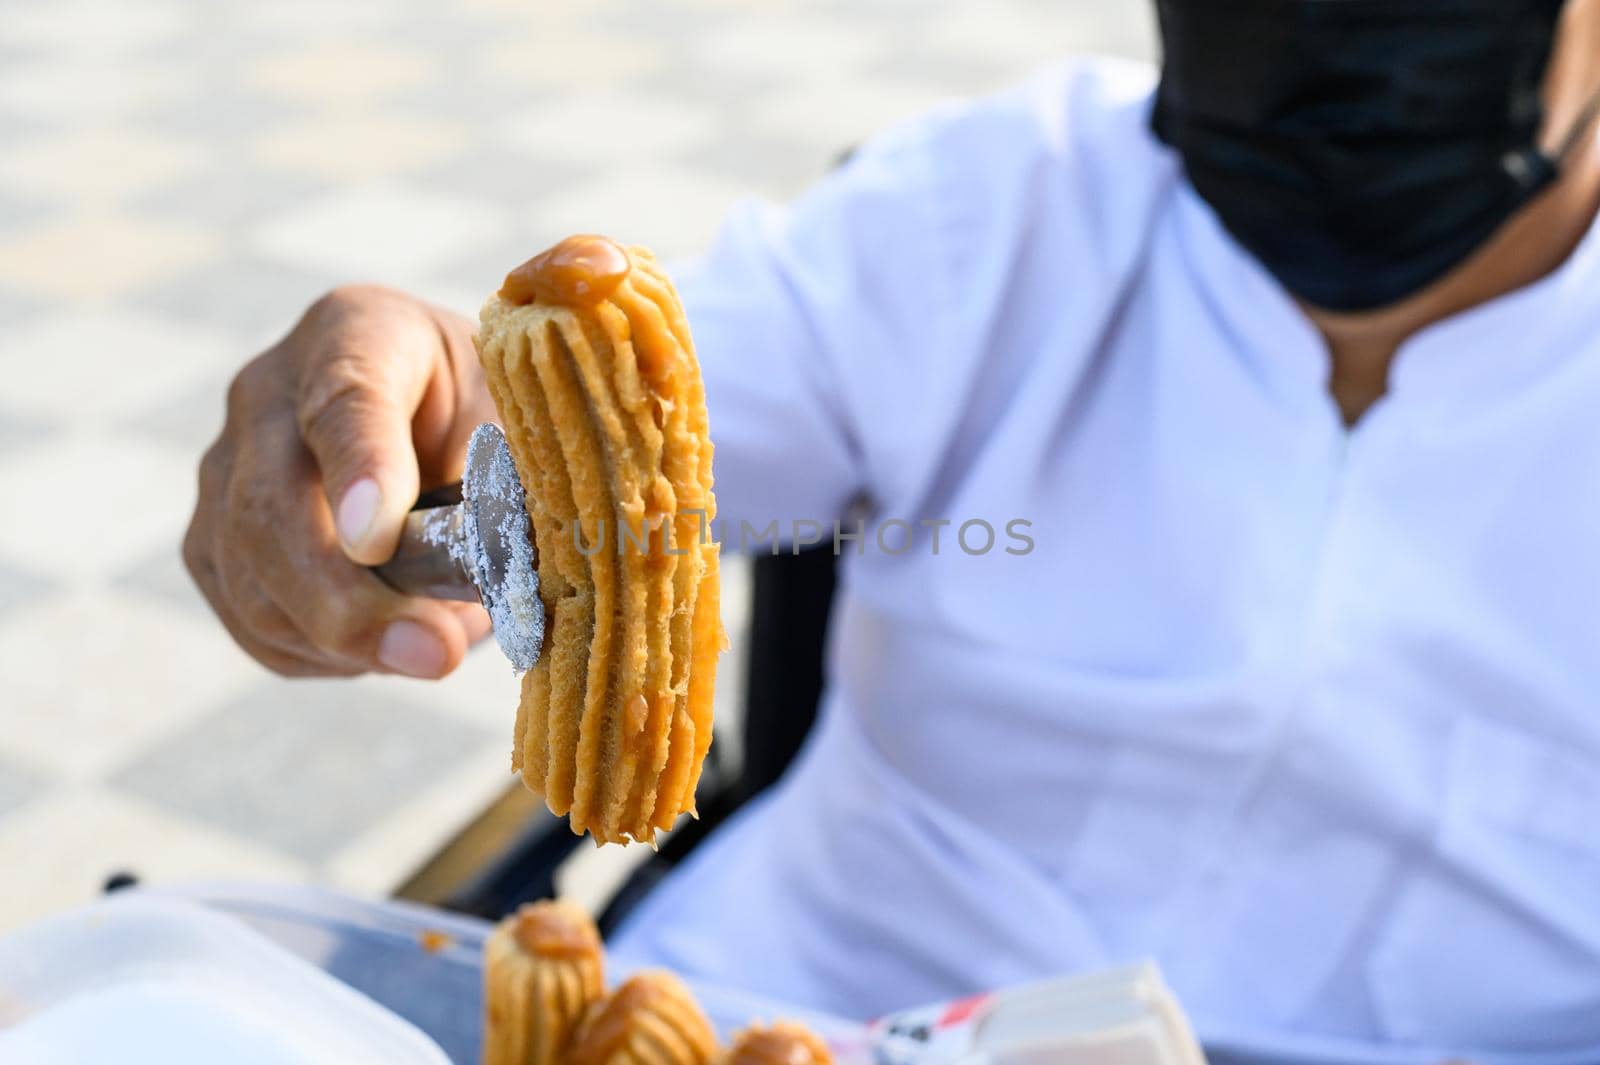 Unrecognizable seller of Peruvian churros, an exquisite dessert filled with blancmange. by Peruphotoart